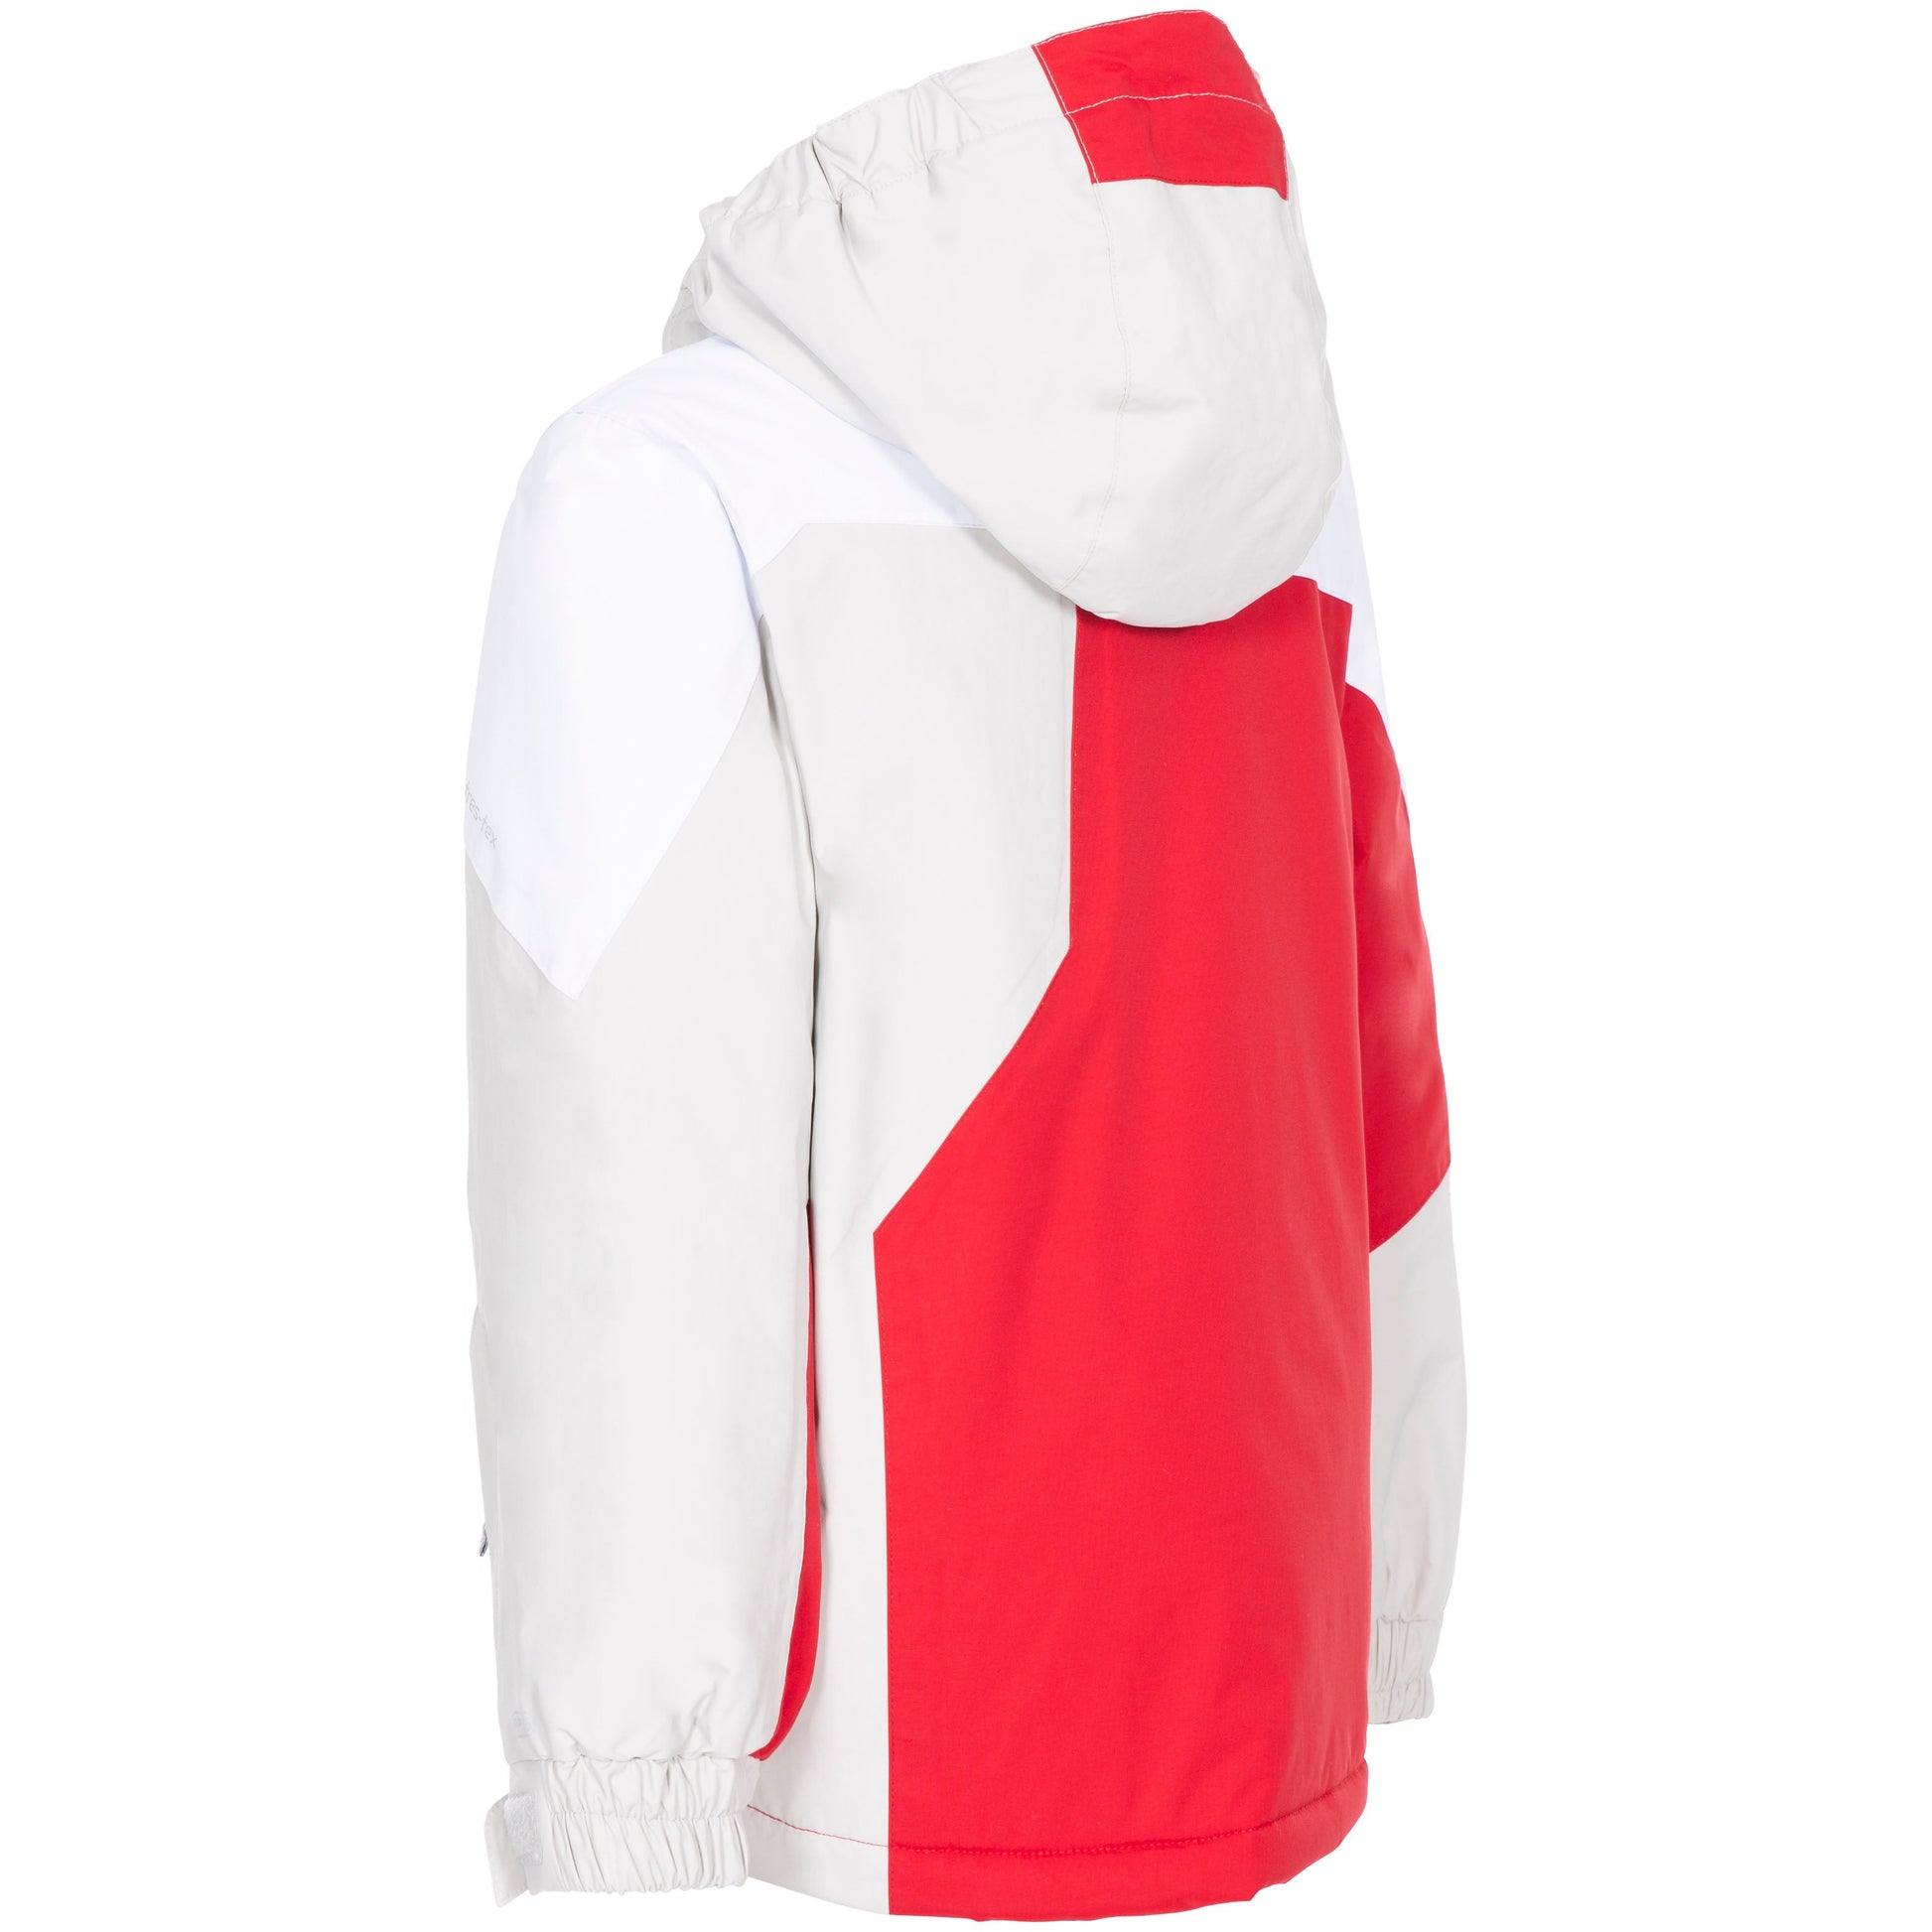 Back of red and white ski jacket curious from trespass ireland